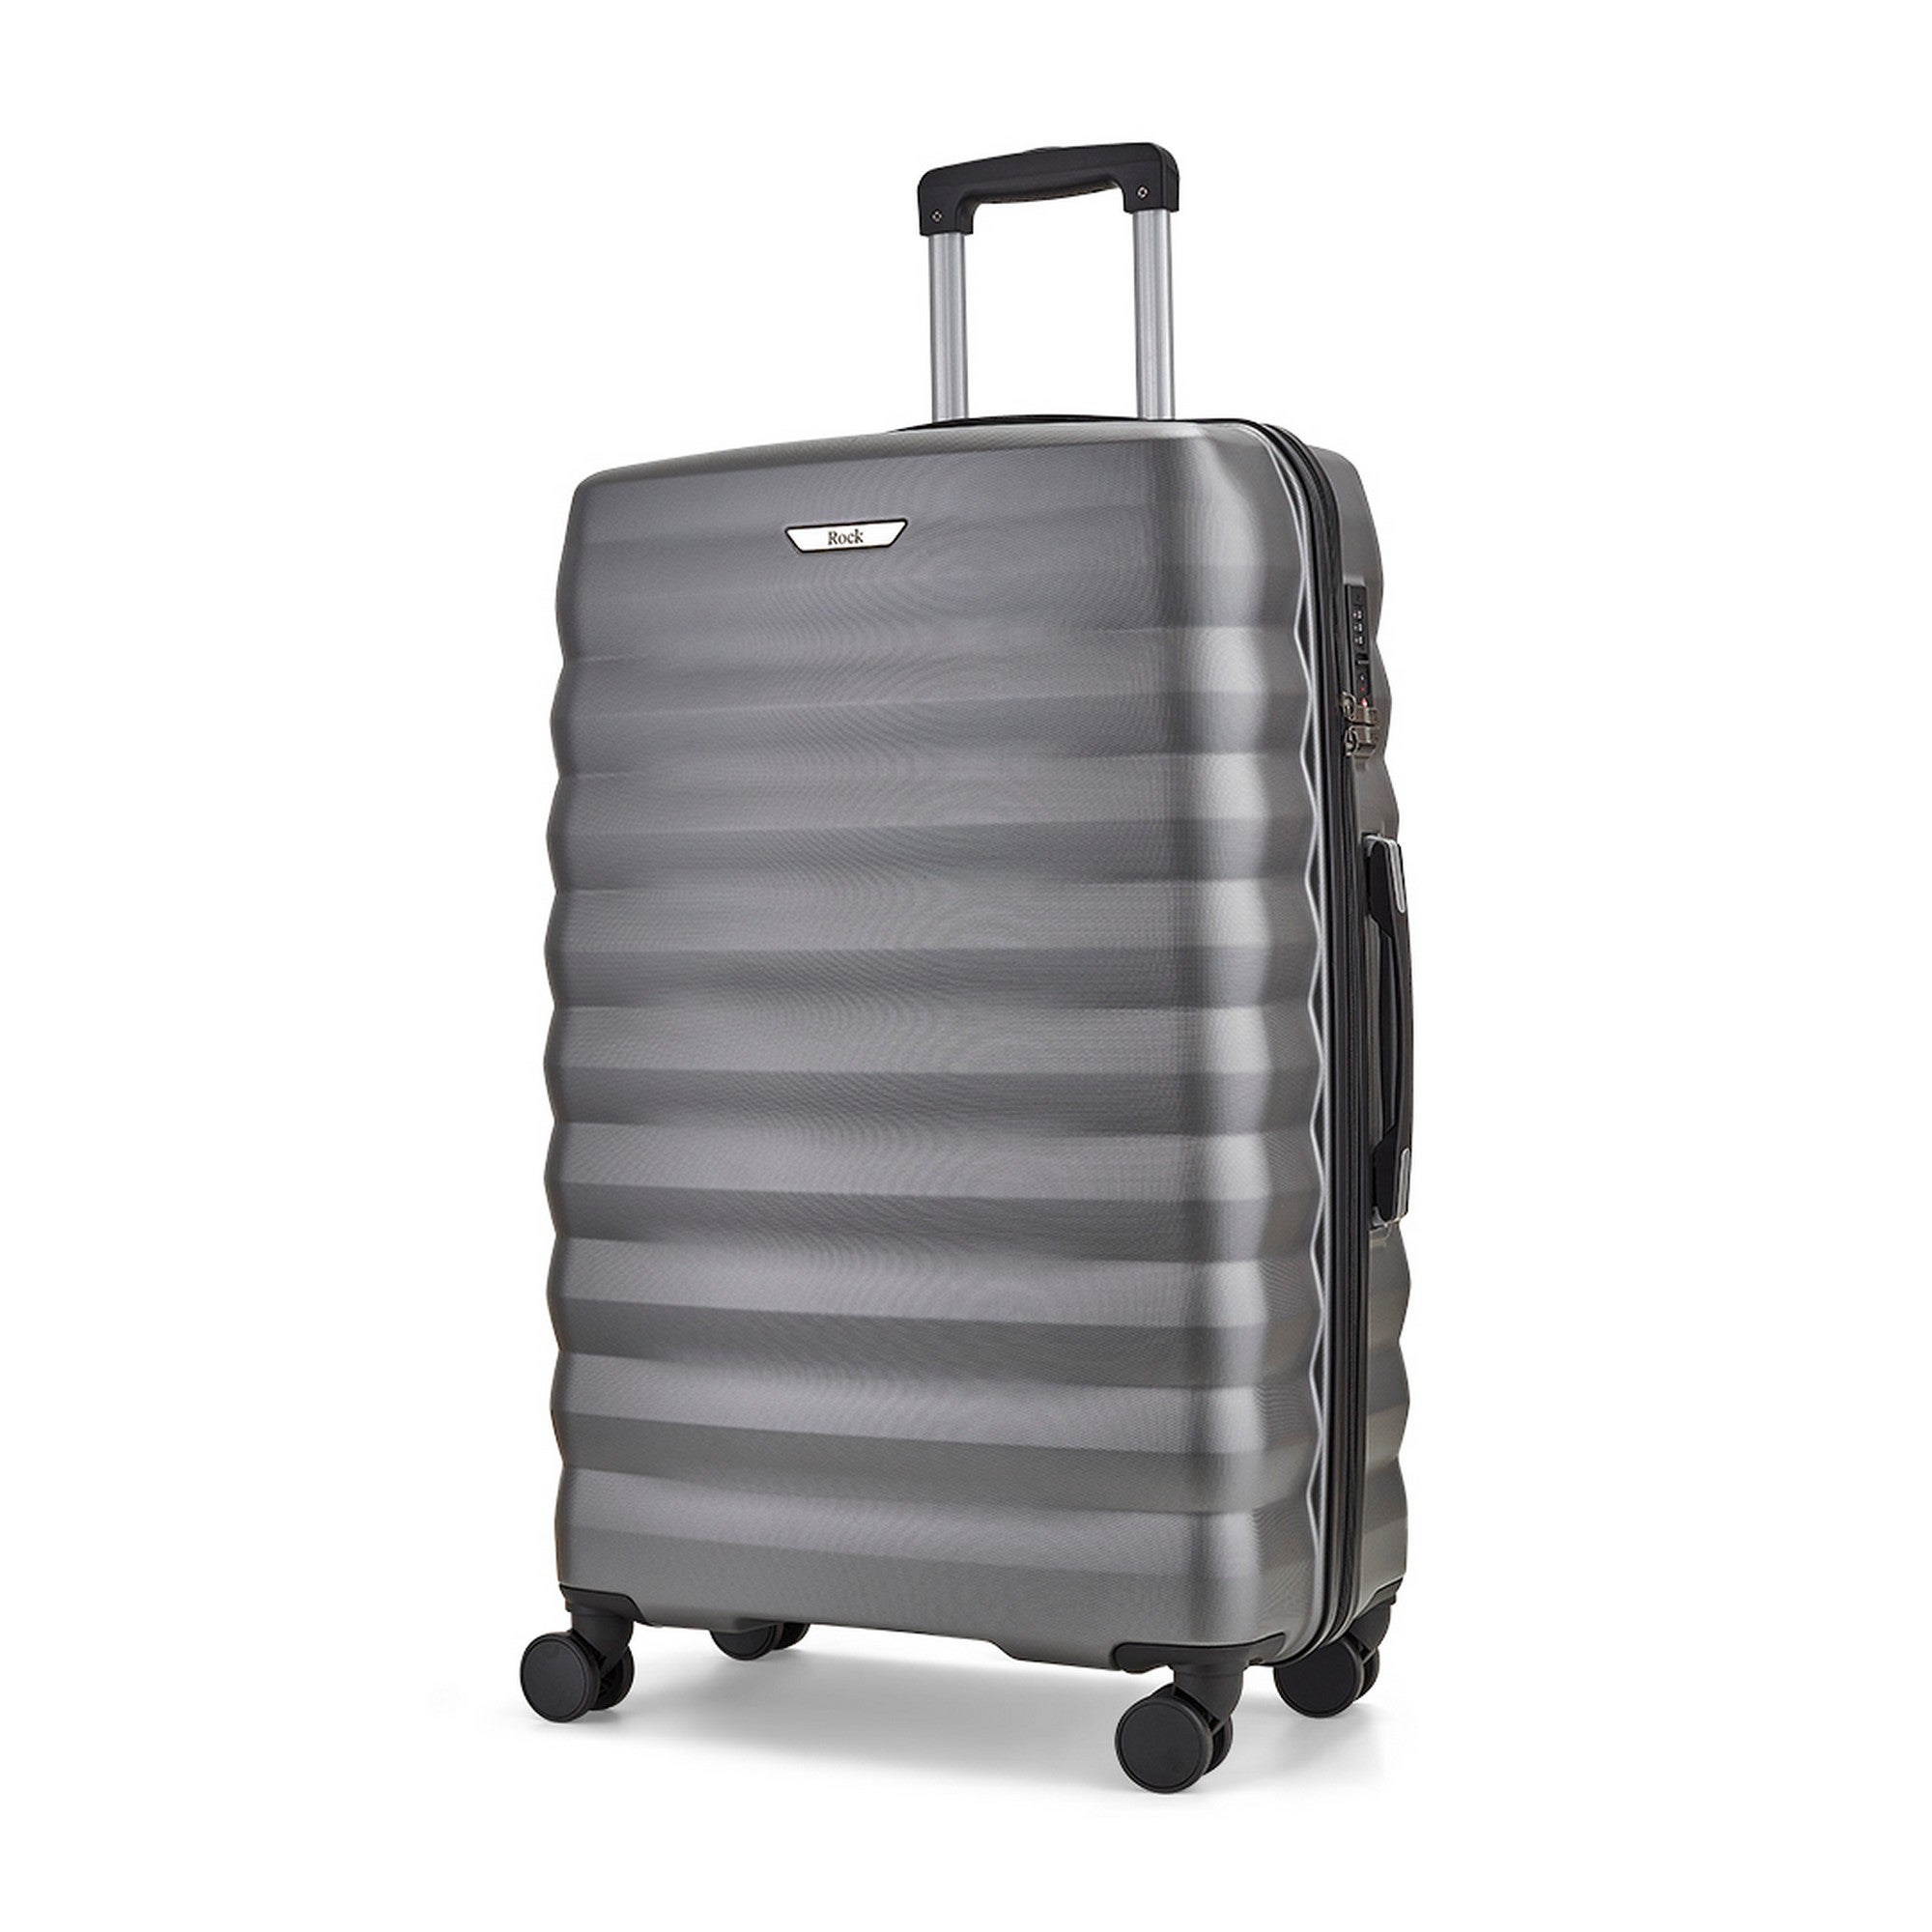 Berlin Suitcase Charcoal